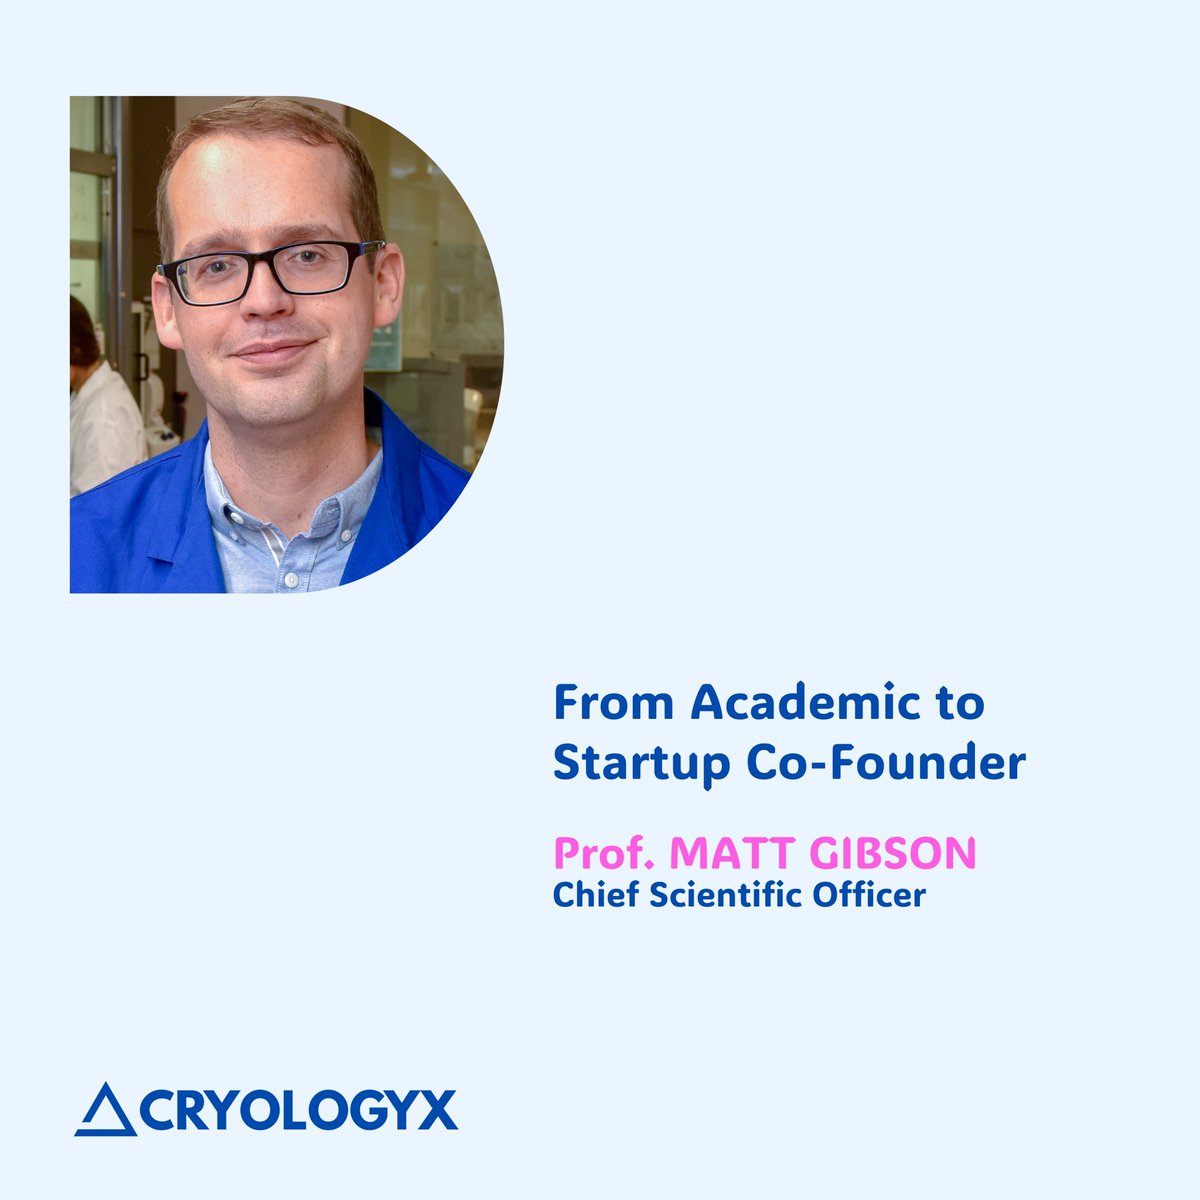 Matt Gibson @LabGibson, our co-founder and CSO shared his story of transitioning from an academic to a startup co-founder. Read full article: cryologyx.com/blogs/f/from-a…. Follow for more updates! Visit our website: cryologyx.com. #StartUp #Entrepreneur #biotech #innovation